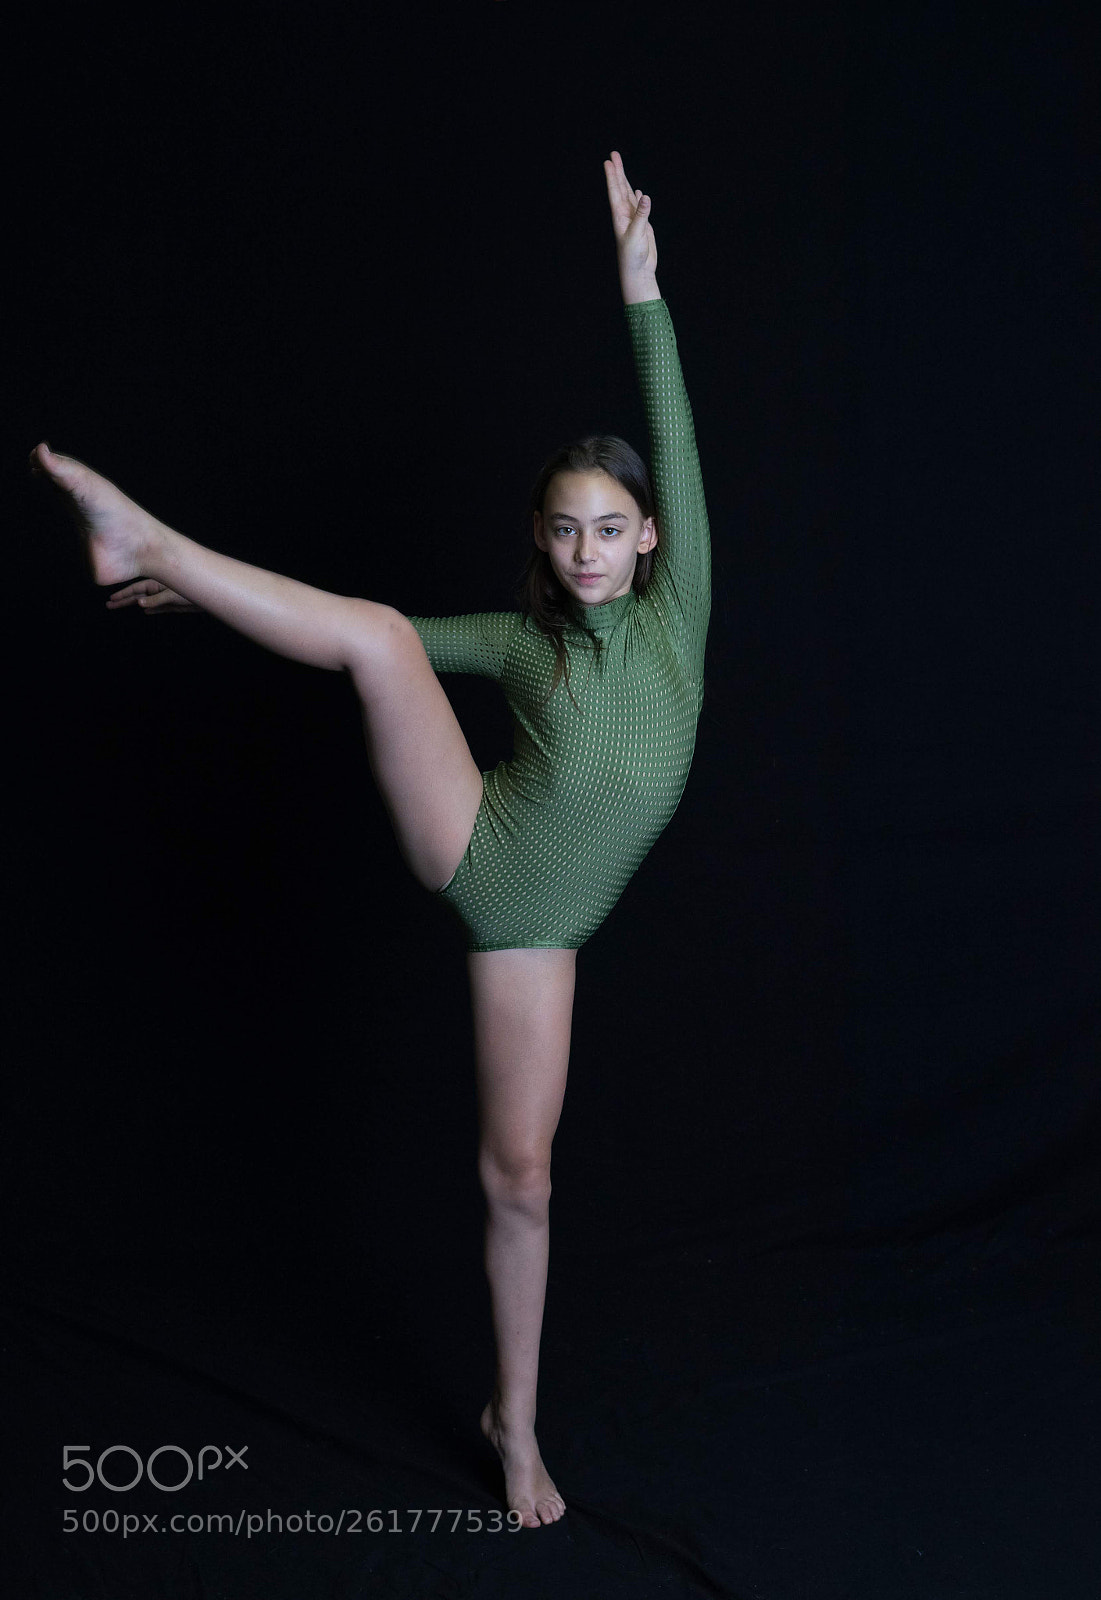 Sony a7 sample photo. Photo shoot with dancer photography